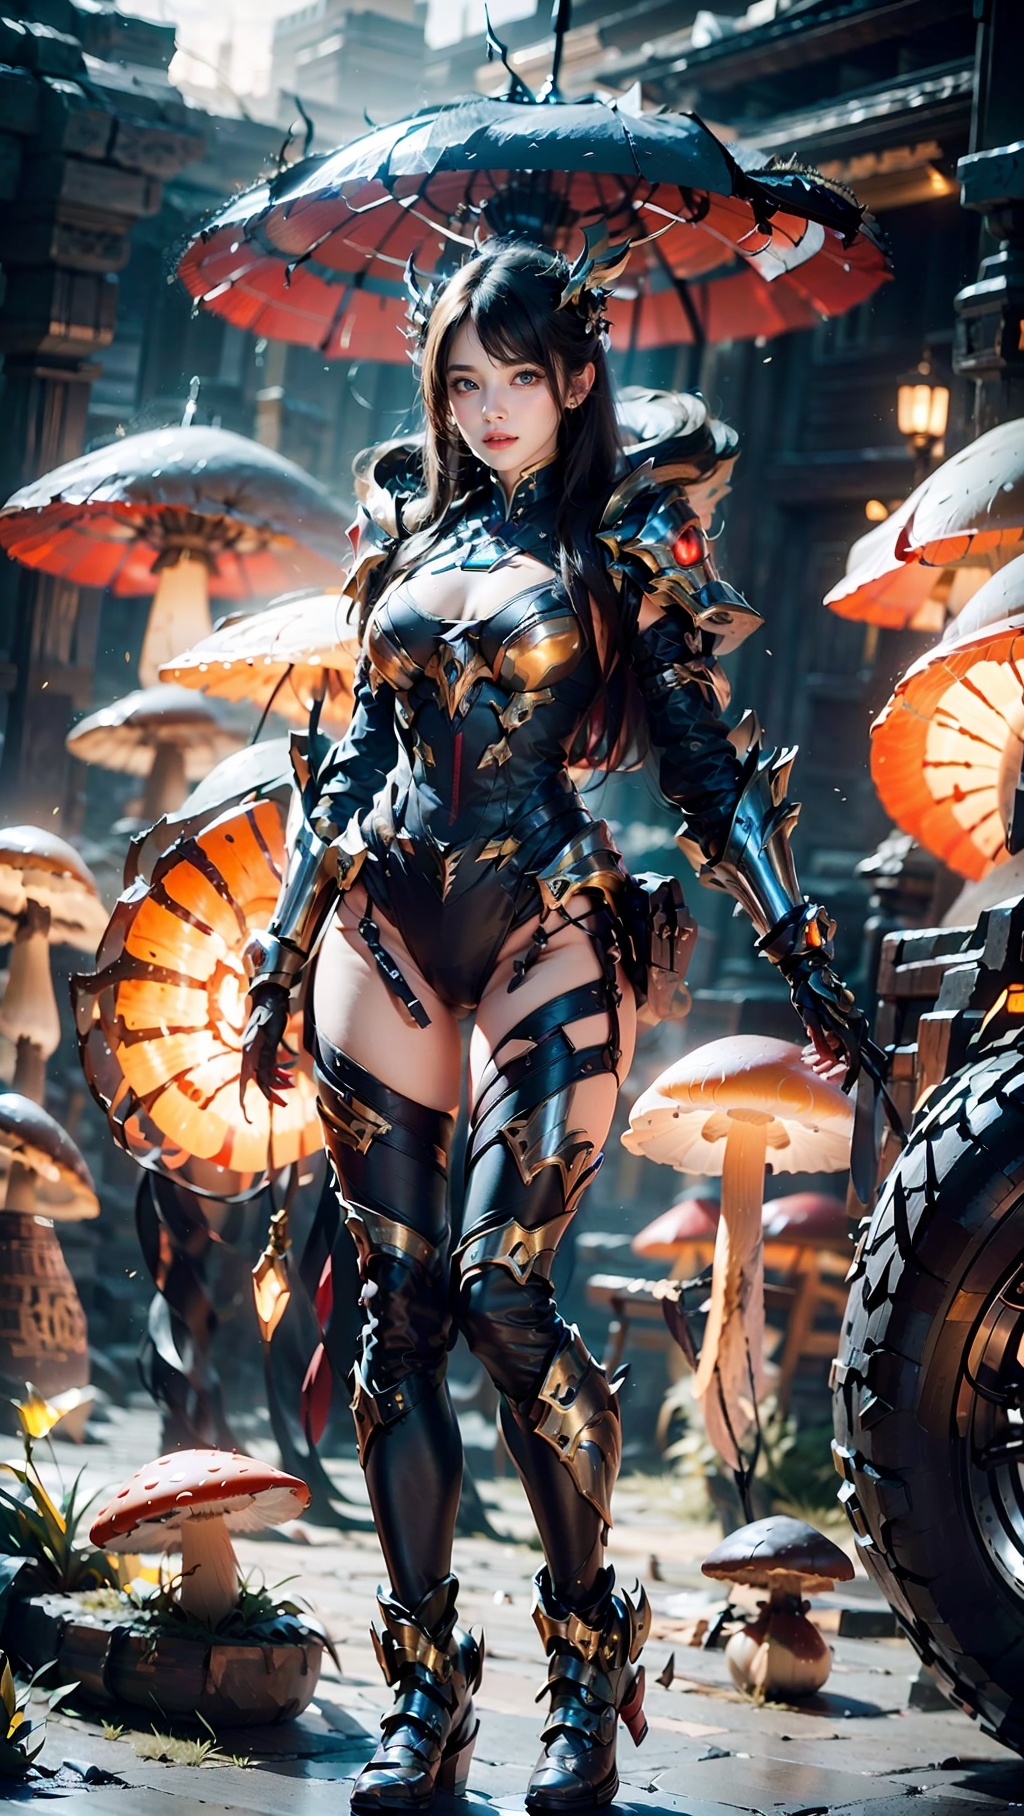 Zerg mecha (Queen), Mushroom Forest, mecha, armor, full body, mechanical arthropods, sharp armor, mushroom forest background, glowing mushrooms, shining mushrooms, multi mushrooms, gloves, complex armor, mecha, mechanical boots, standing, black long hair, sharp fingers, terrifying hand weapons, abnormal hands, mechanical spider legs behind, single ponytail, semi exposed thighs, ground, outdoor, blurry background, The purple glowing spot at the knee, 1girl, glow, cyberhanfu, mech,Steampunk mecha, Cuiyu Armor